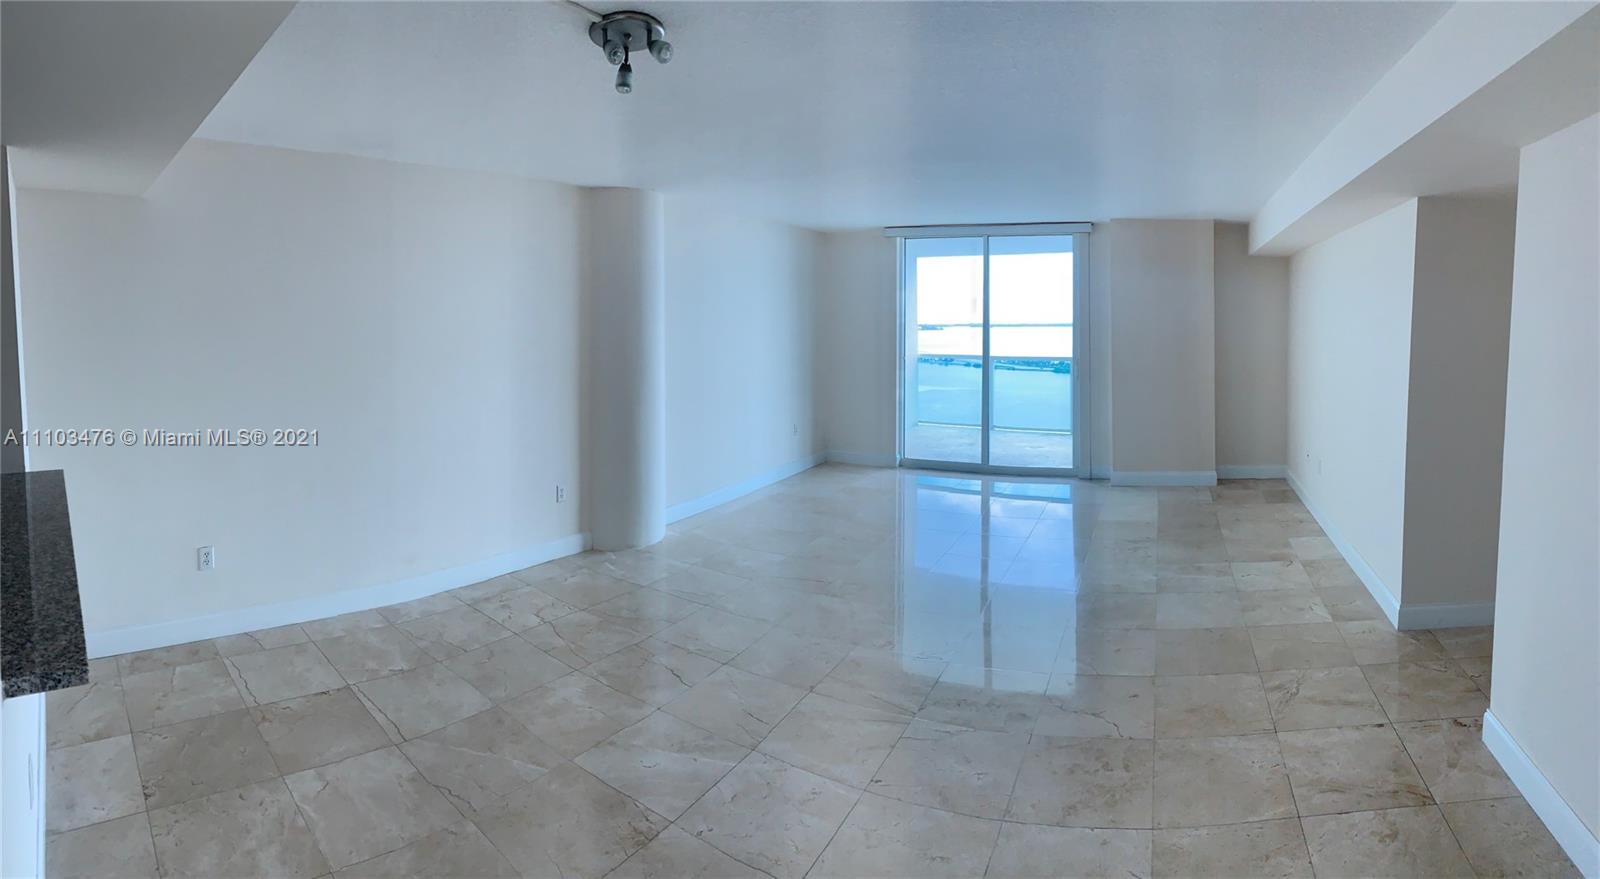 BEAUTIFUL UNIT WITH 2BE/2BA DIRECT OCEAN VIEWS. GRANITE COUNTERTOPS, WALK-IN CLOSET, FLOOR TO CEILING WINDOWS, MARBLE FLOORS THROUGHOUT, BUILDING AMENITIES INCLUDES TENNIS COURT, SPA, RESORT STYLE POOL, 24 H VALET, CAFE/CONVENIENCE STORE, DRY CLEAN VALET, BBQ AREA, CHILDREN PLAYGROUND, PARTY ROOM, GYM, SAUNA. MUST SEE.